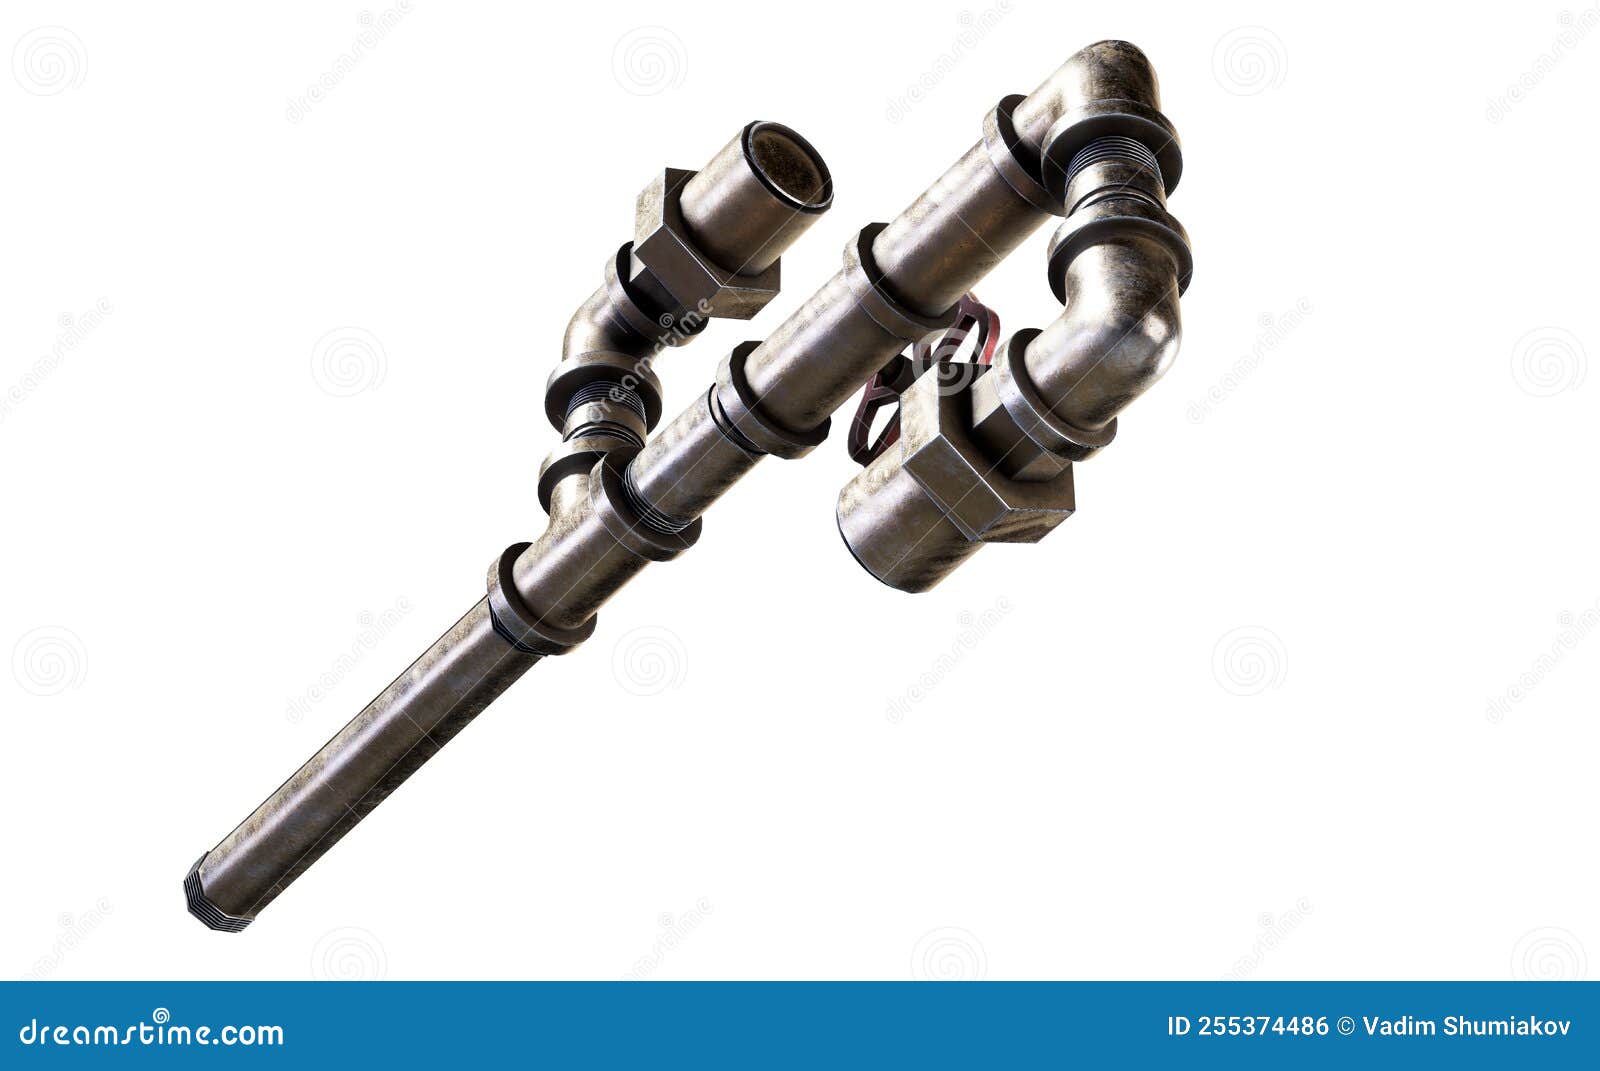 metal tubes over white background